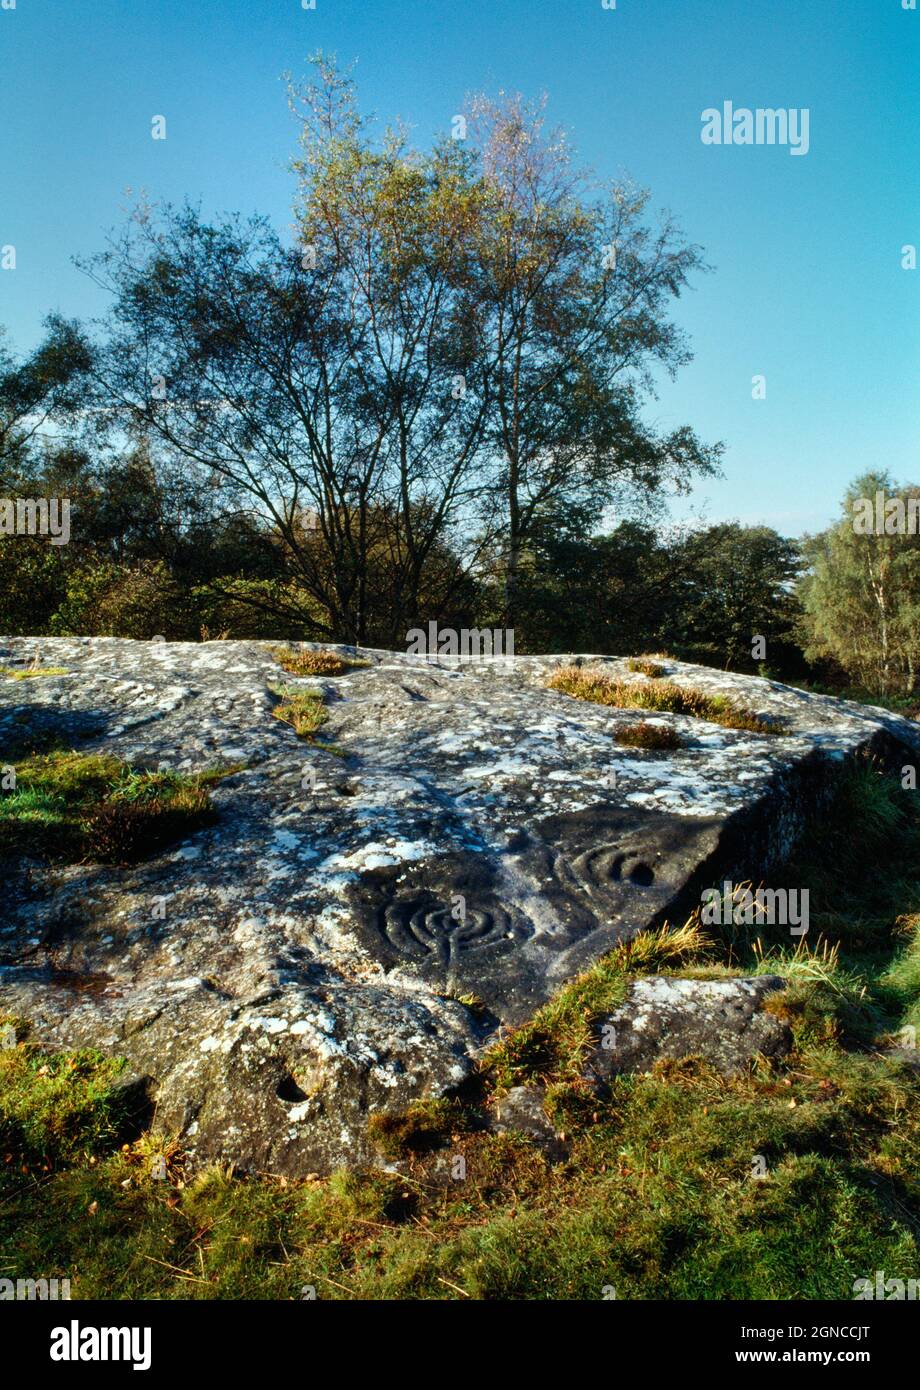 View WSW of prehistoric rock art including many cup-and-ring markings on a large dome of sandstone at Roughting Linn, Northumberland, England, UK. Stock Photo